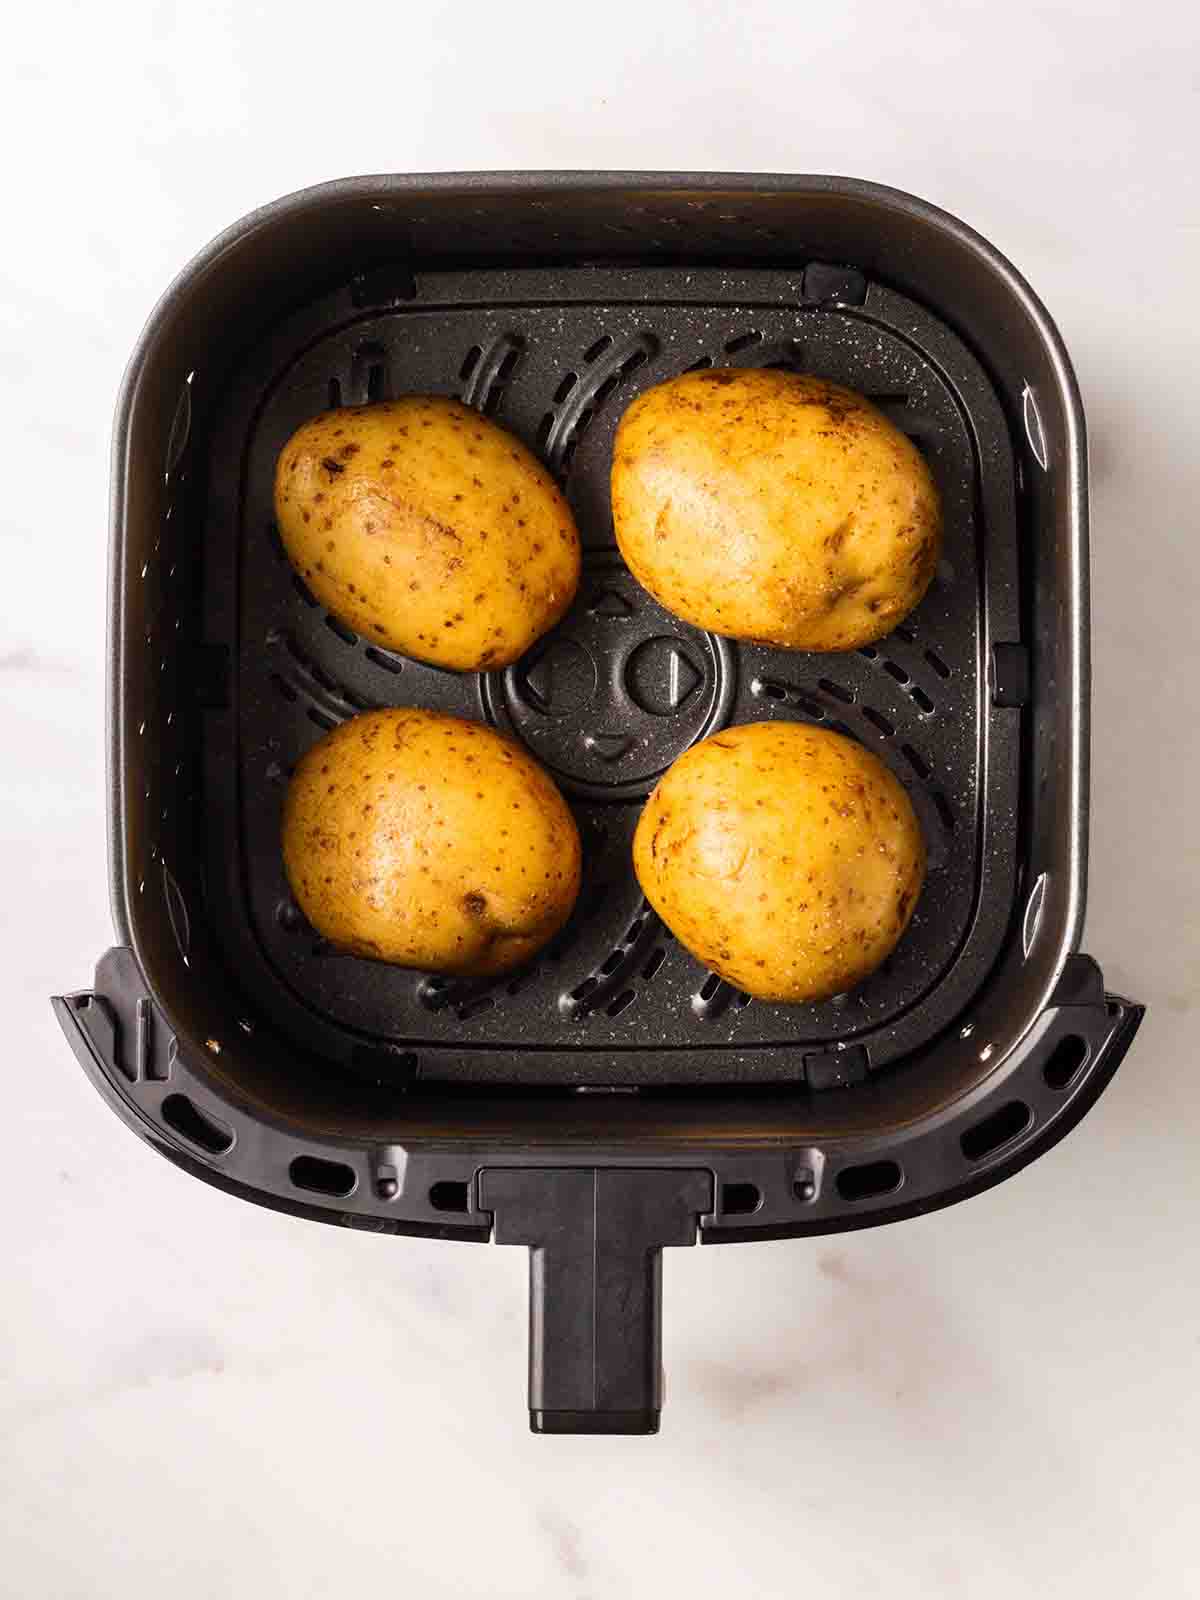 Four jacket potatoes in the air fryer, ready to be cooked.